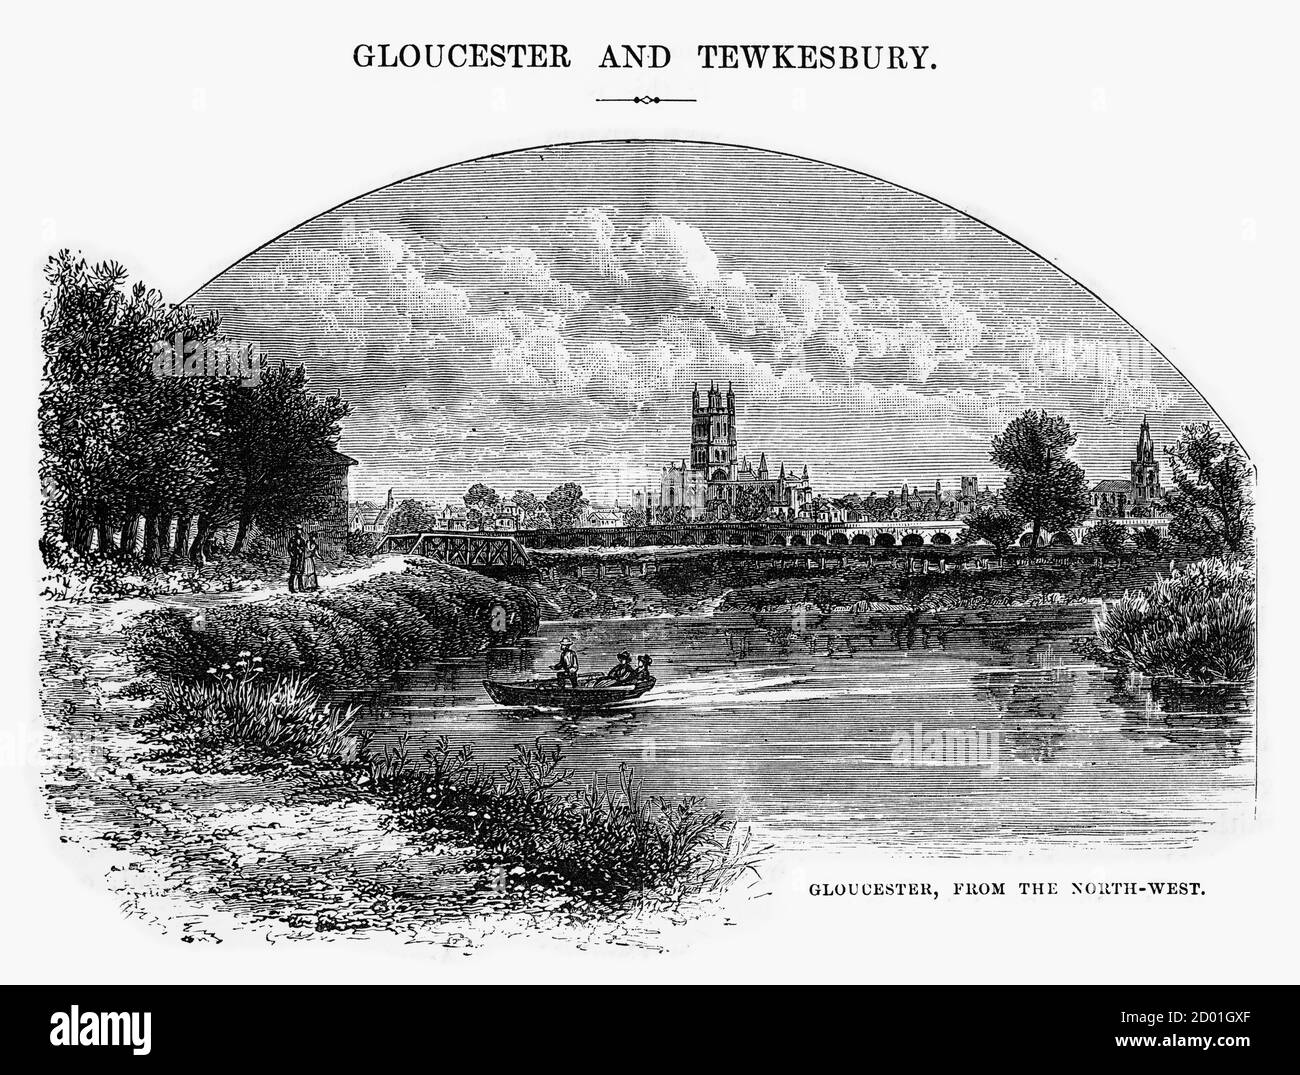 Gloucester from the North-West, Gloucestershire, England Victorian Engraving, 1840 Stock Photo